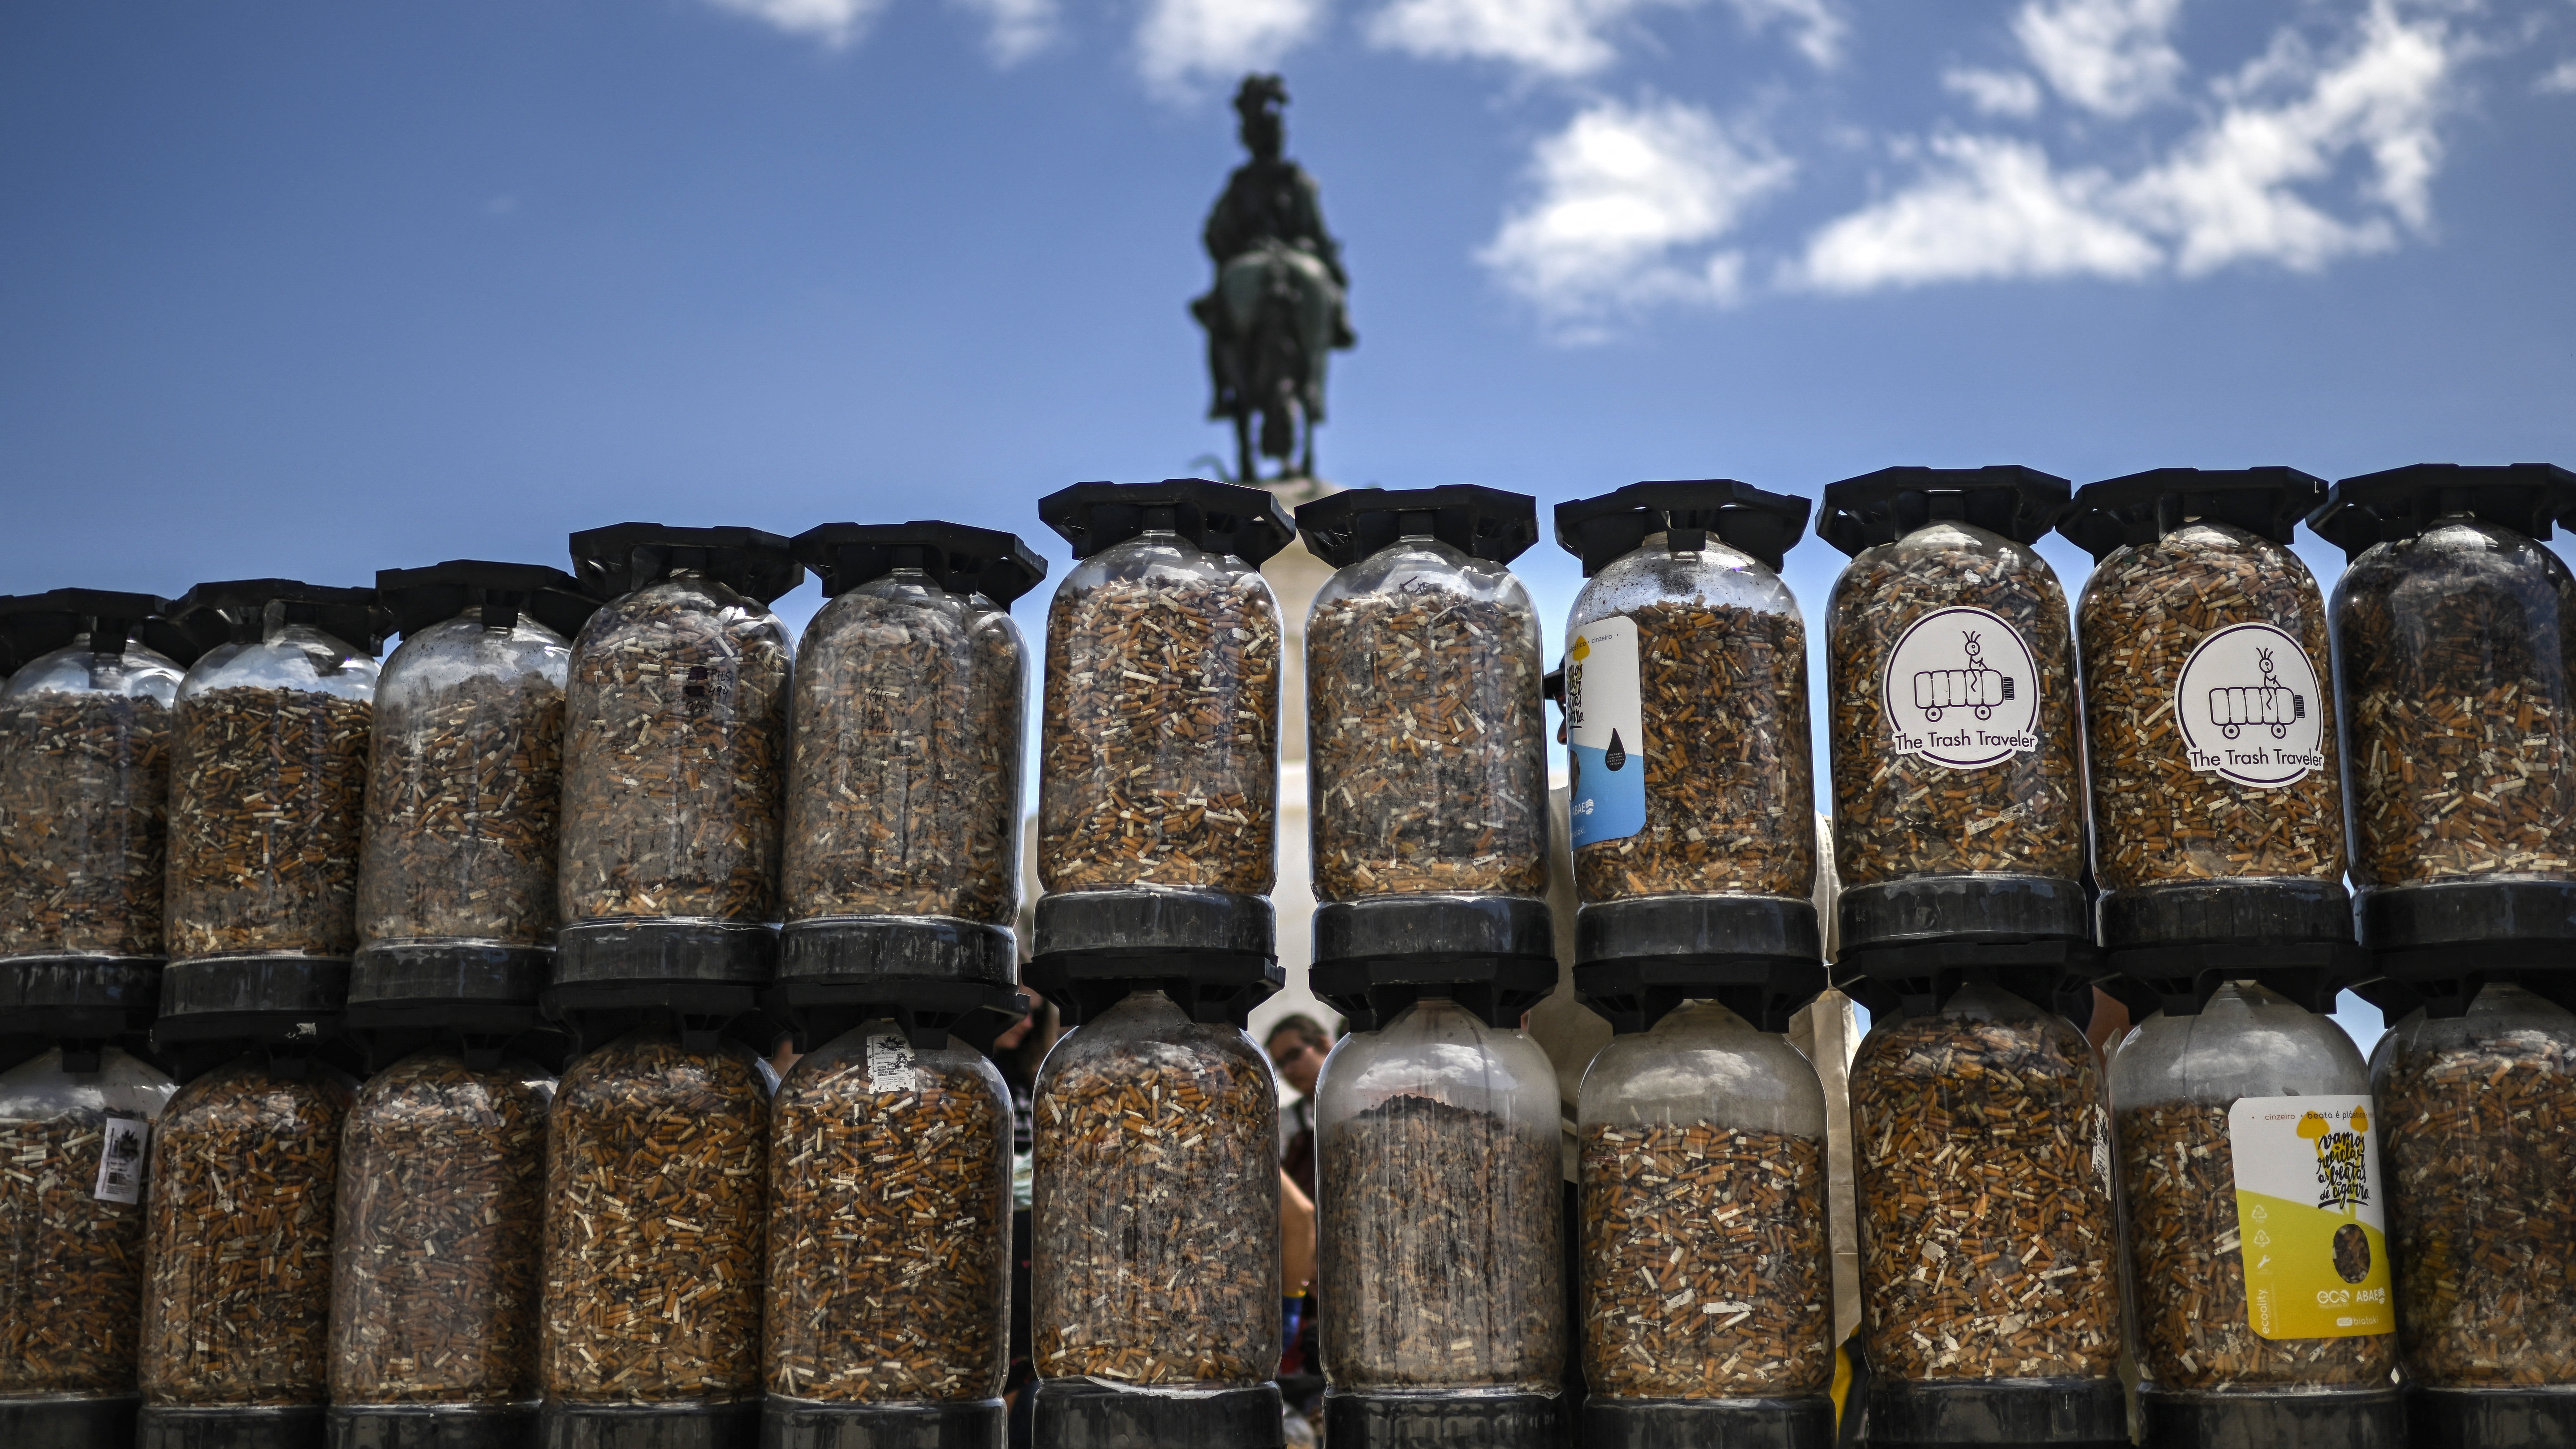 Containers, full of cigarette butts collected in one week, are displayed at Comercio square in Lisbon. /Patricia de Melo Moreira /AFP